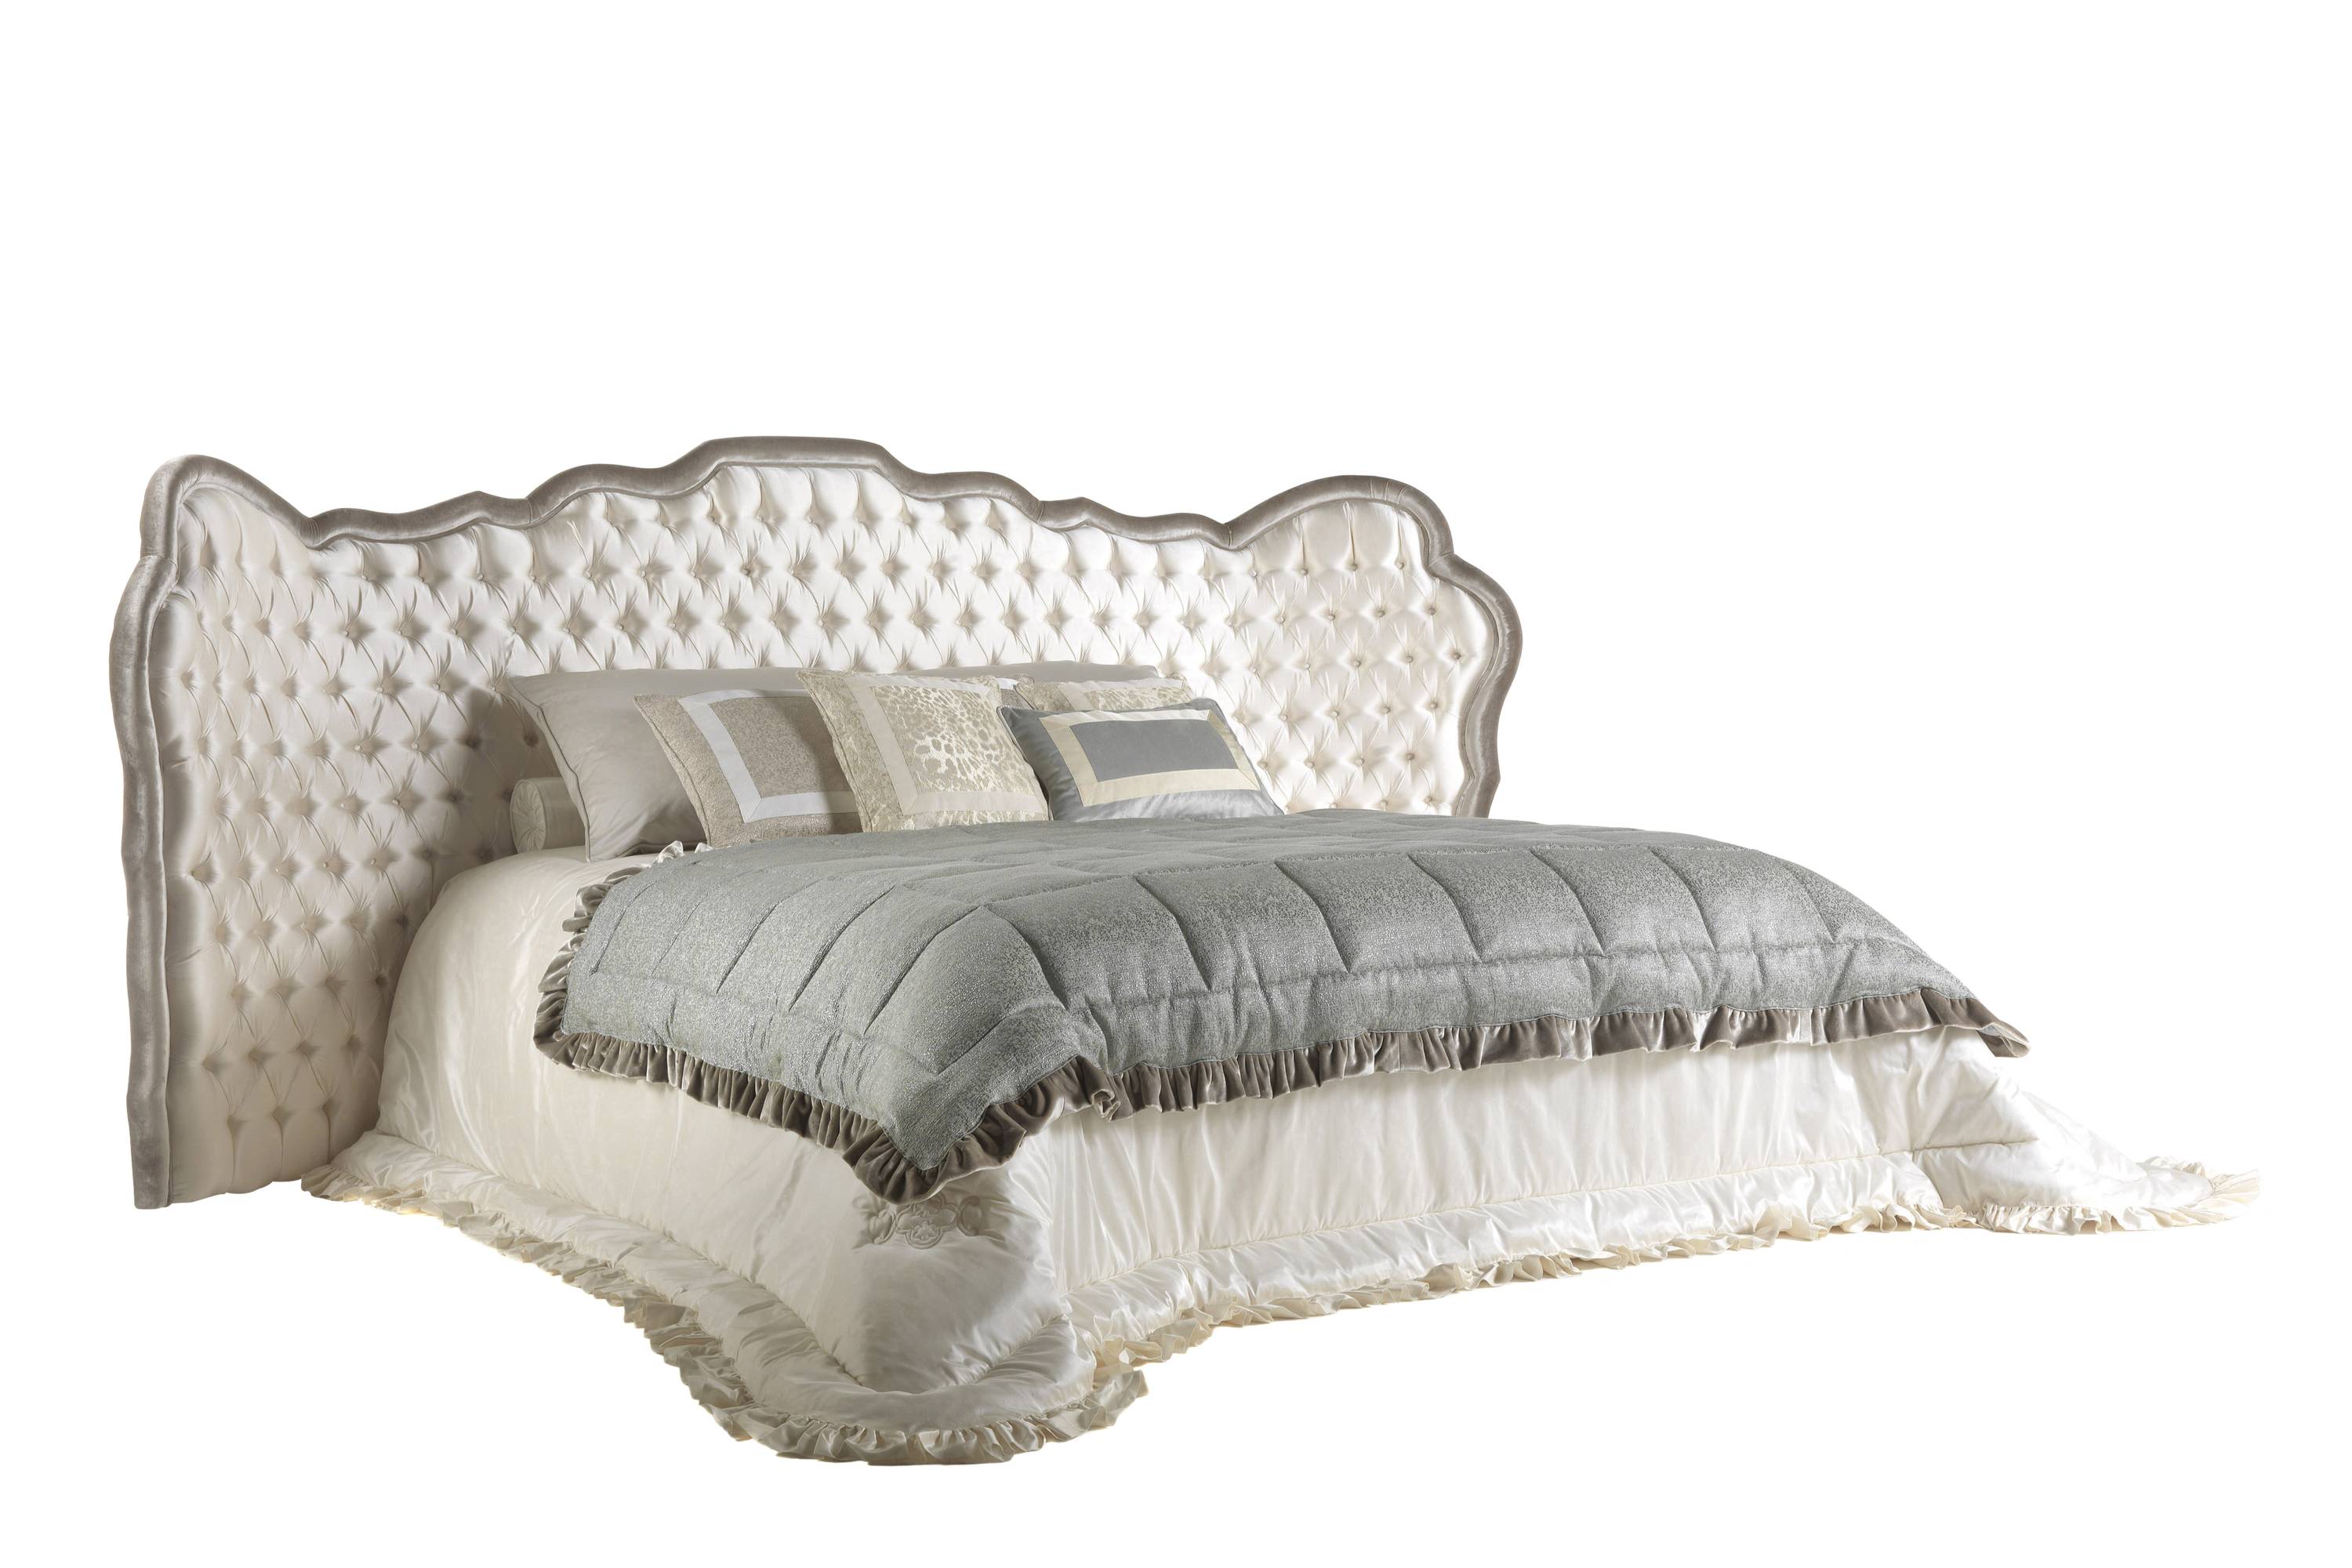 PLEASURE bed - Quality furniture and timeless elegance with luxury Made in Italy classic BEDS.